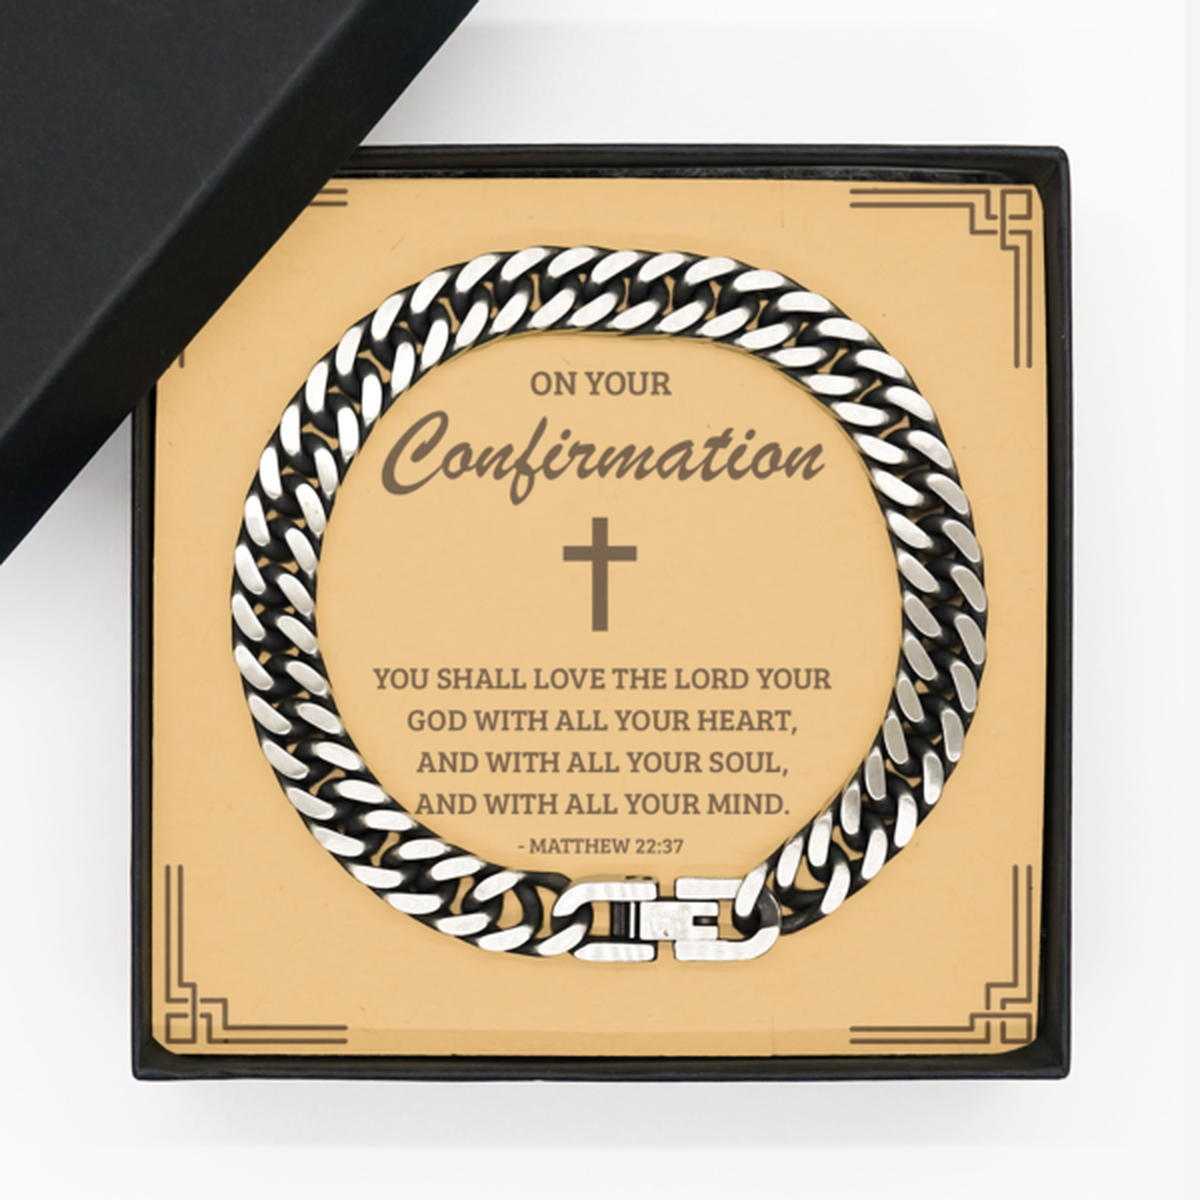 Confirmation Gifts for Teenage Boys, You shall love the Lord your God, Cuban Link Chain Bracelet with Bible Verse Message Card, Religious Catholic Bracelet for Son, Grandson, Dad, Godfather